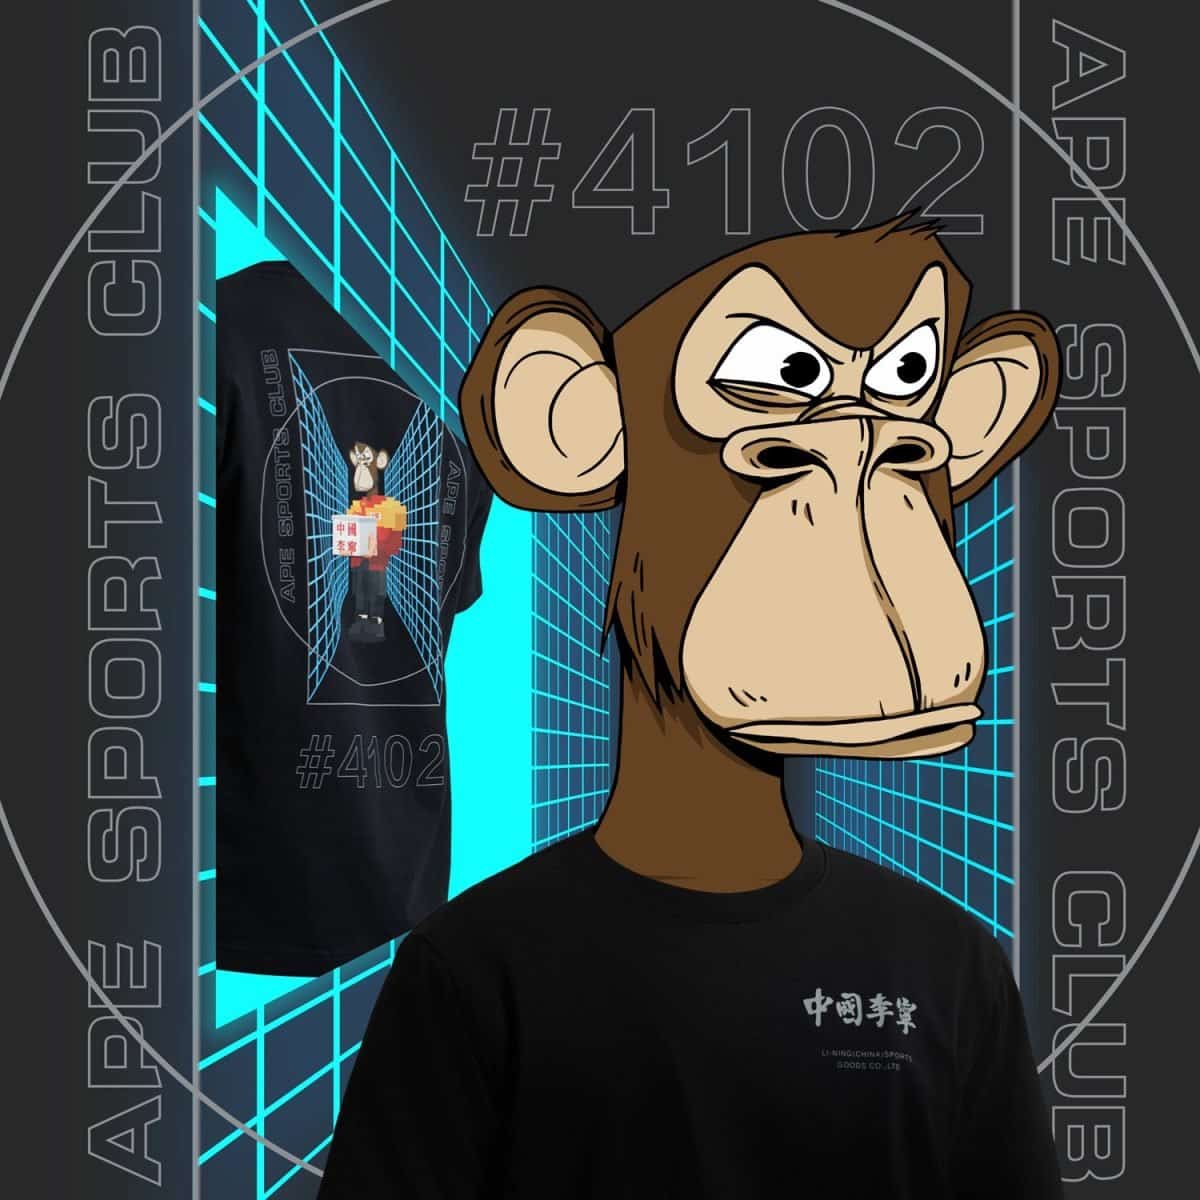 The picture shows a merch by Chinese Sports Brand Li Ning featuring the Bored Ape NFT